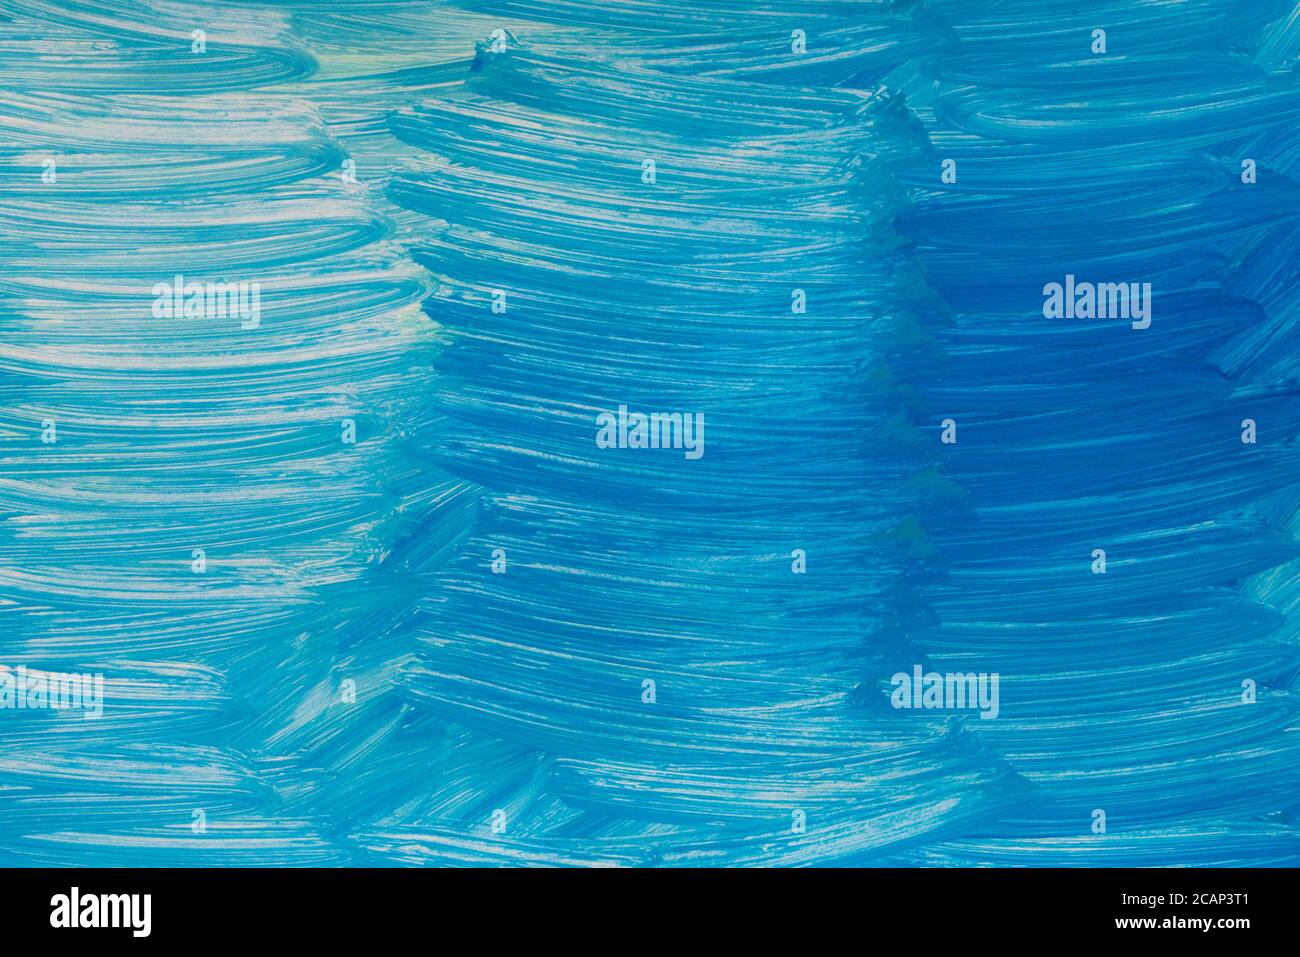 blue color painted on paper background texture Stock Photo